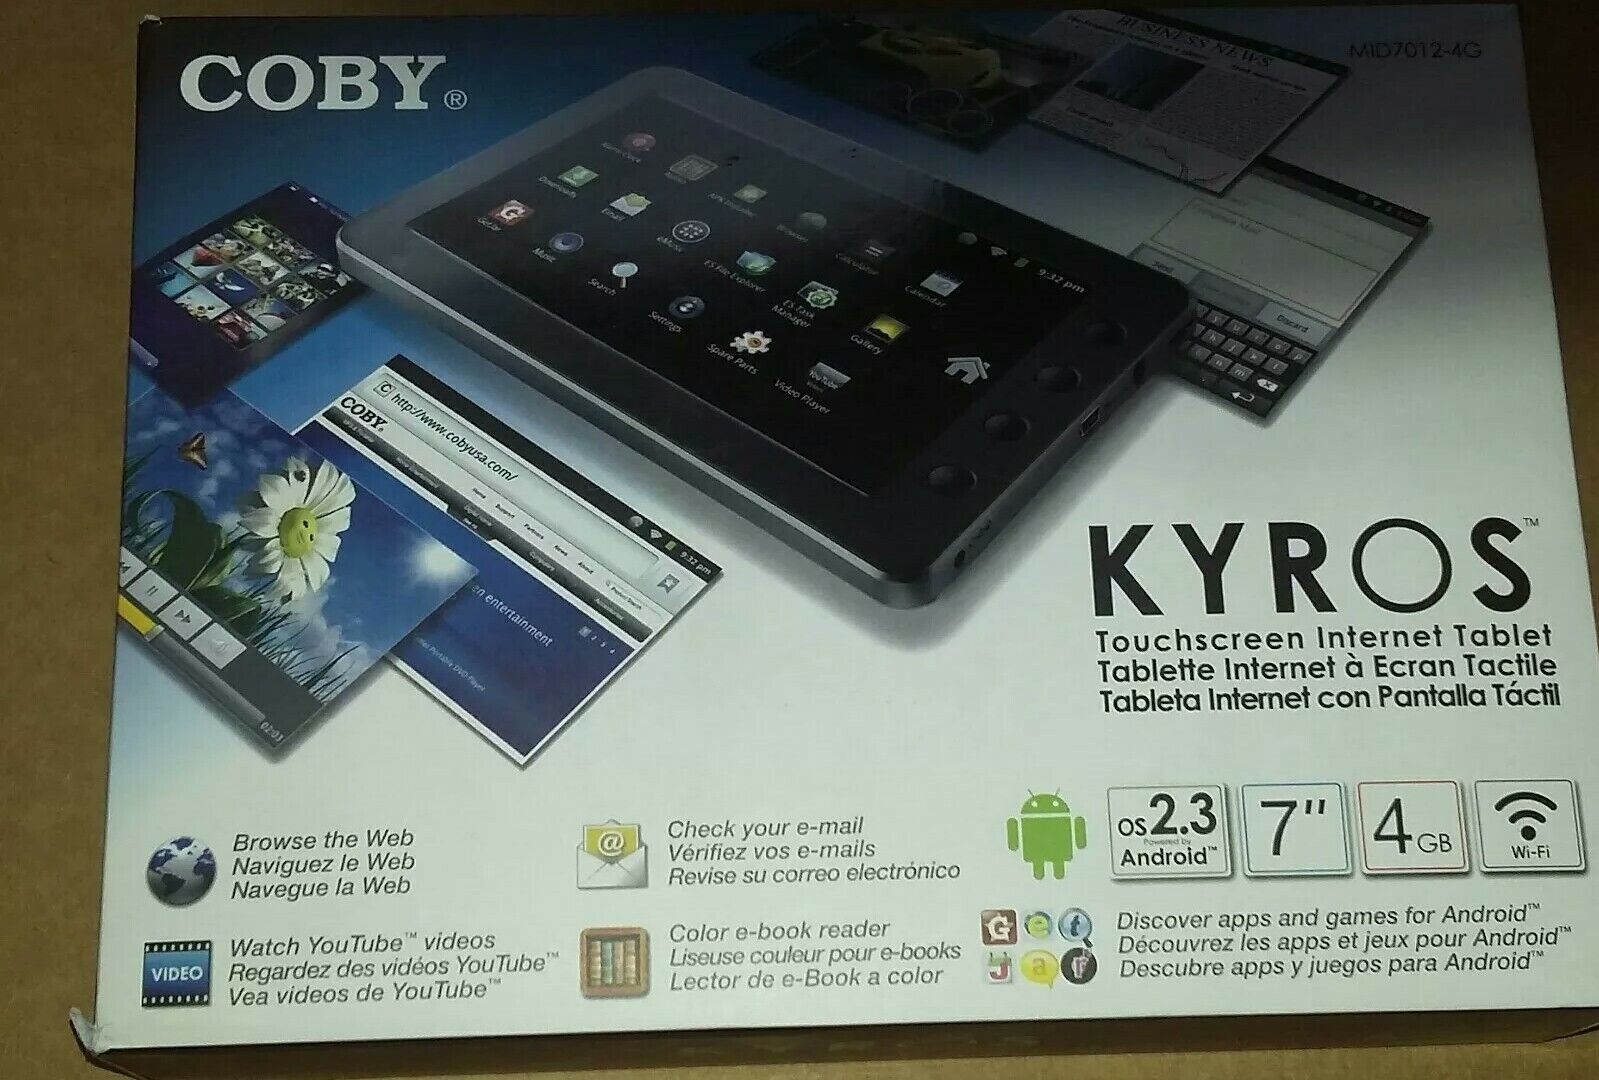 Coby Kyros MID7012-4G/7"